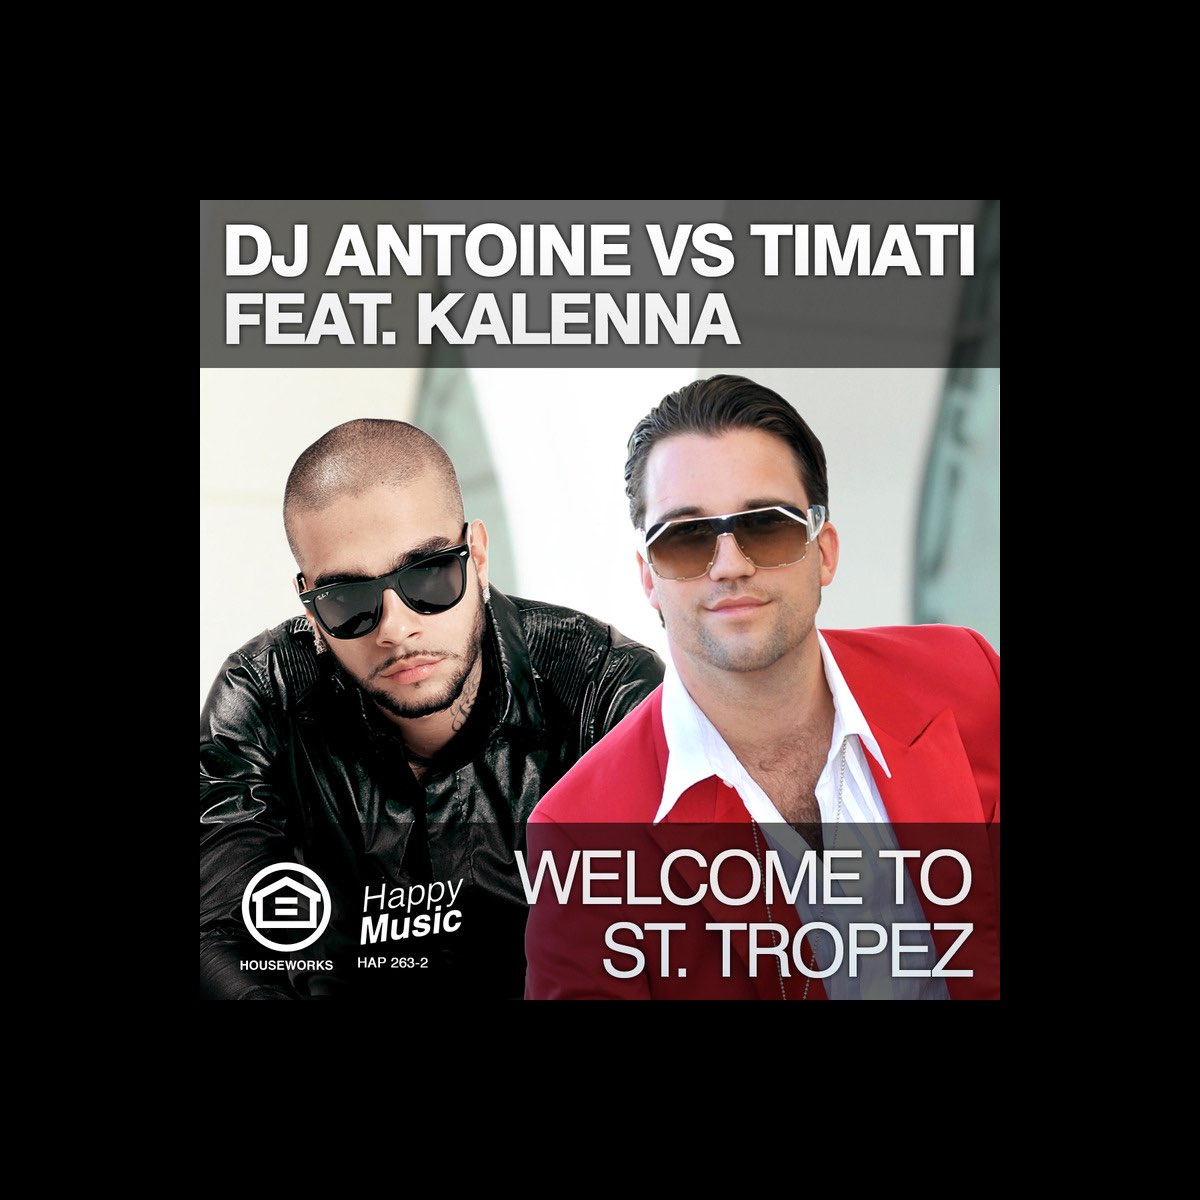 Welcome to St. Tropez (DJ Antoine vs. Timati) [feat. Kalenna] - EP by DJ  Antoine & Timati on Apple Music